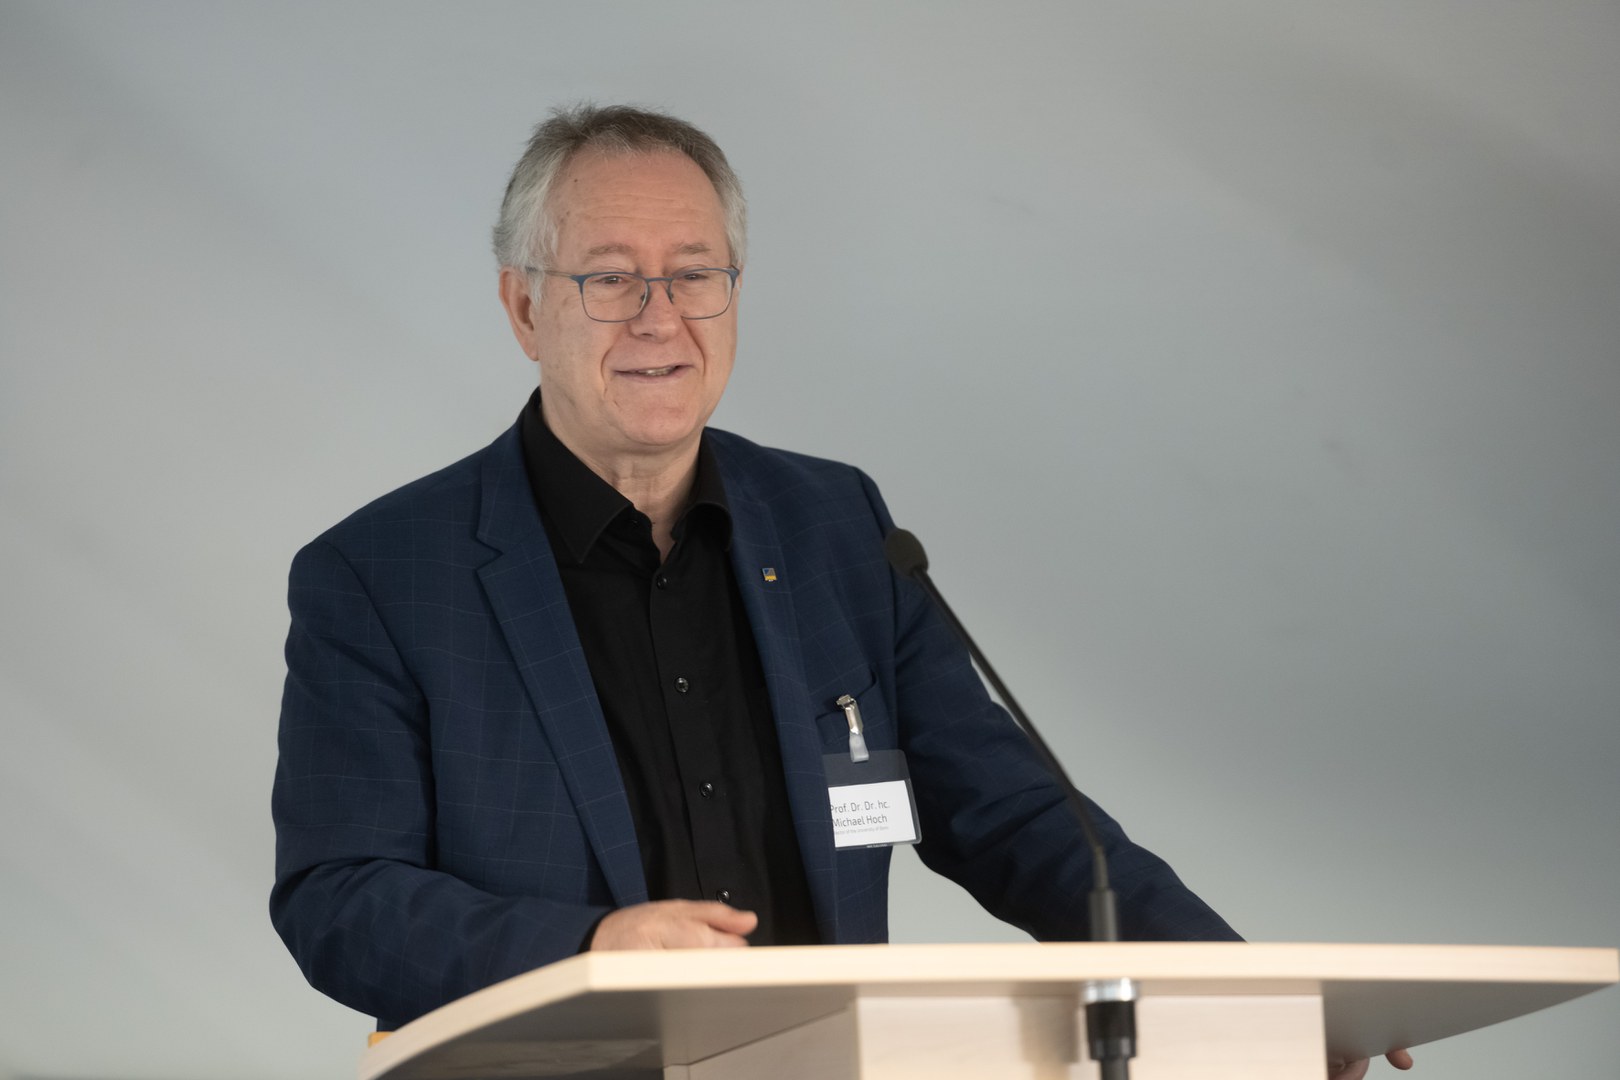 The Rector of the University of Bonn